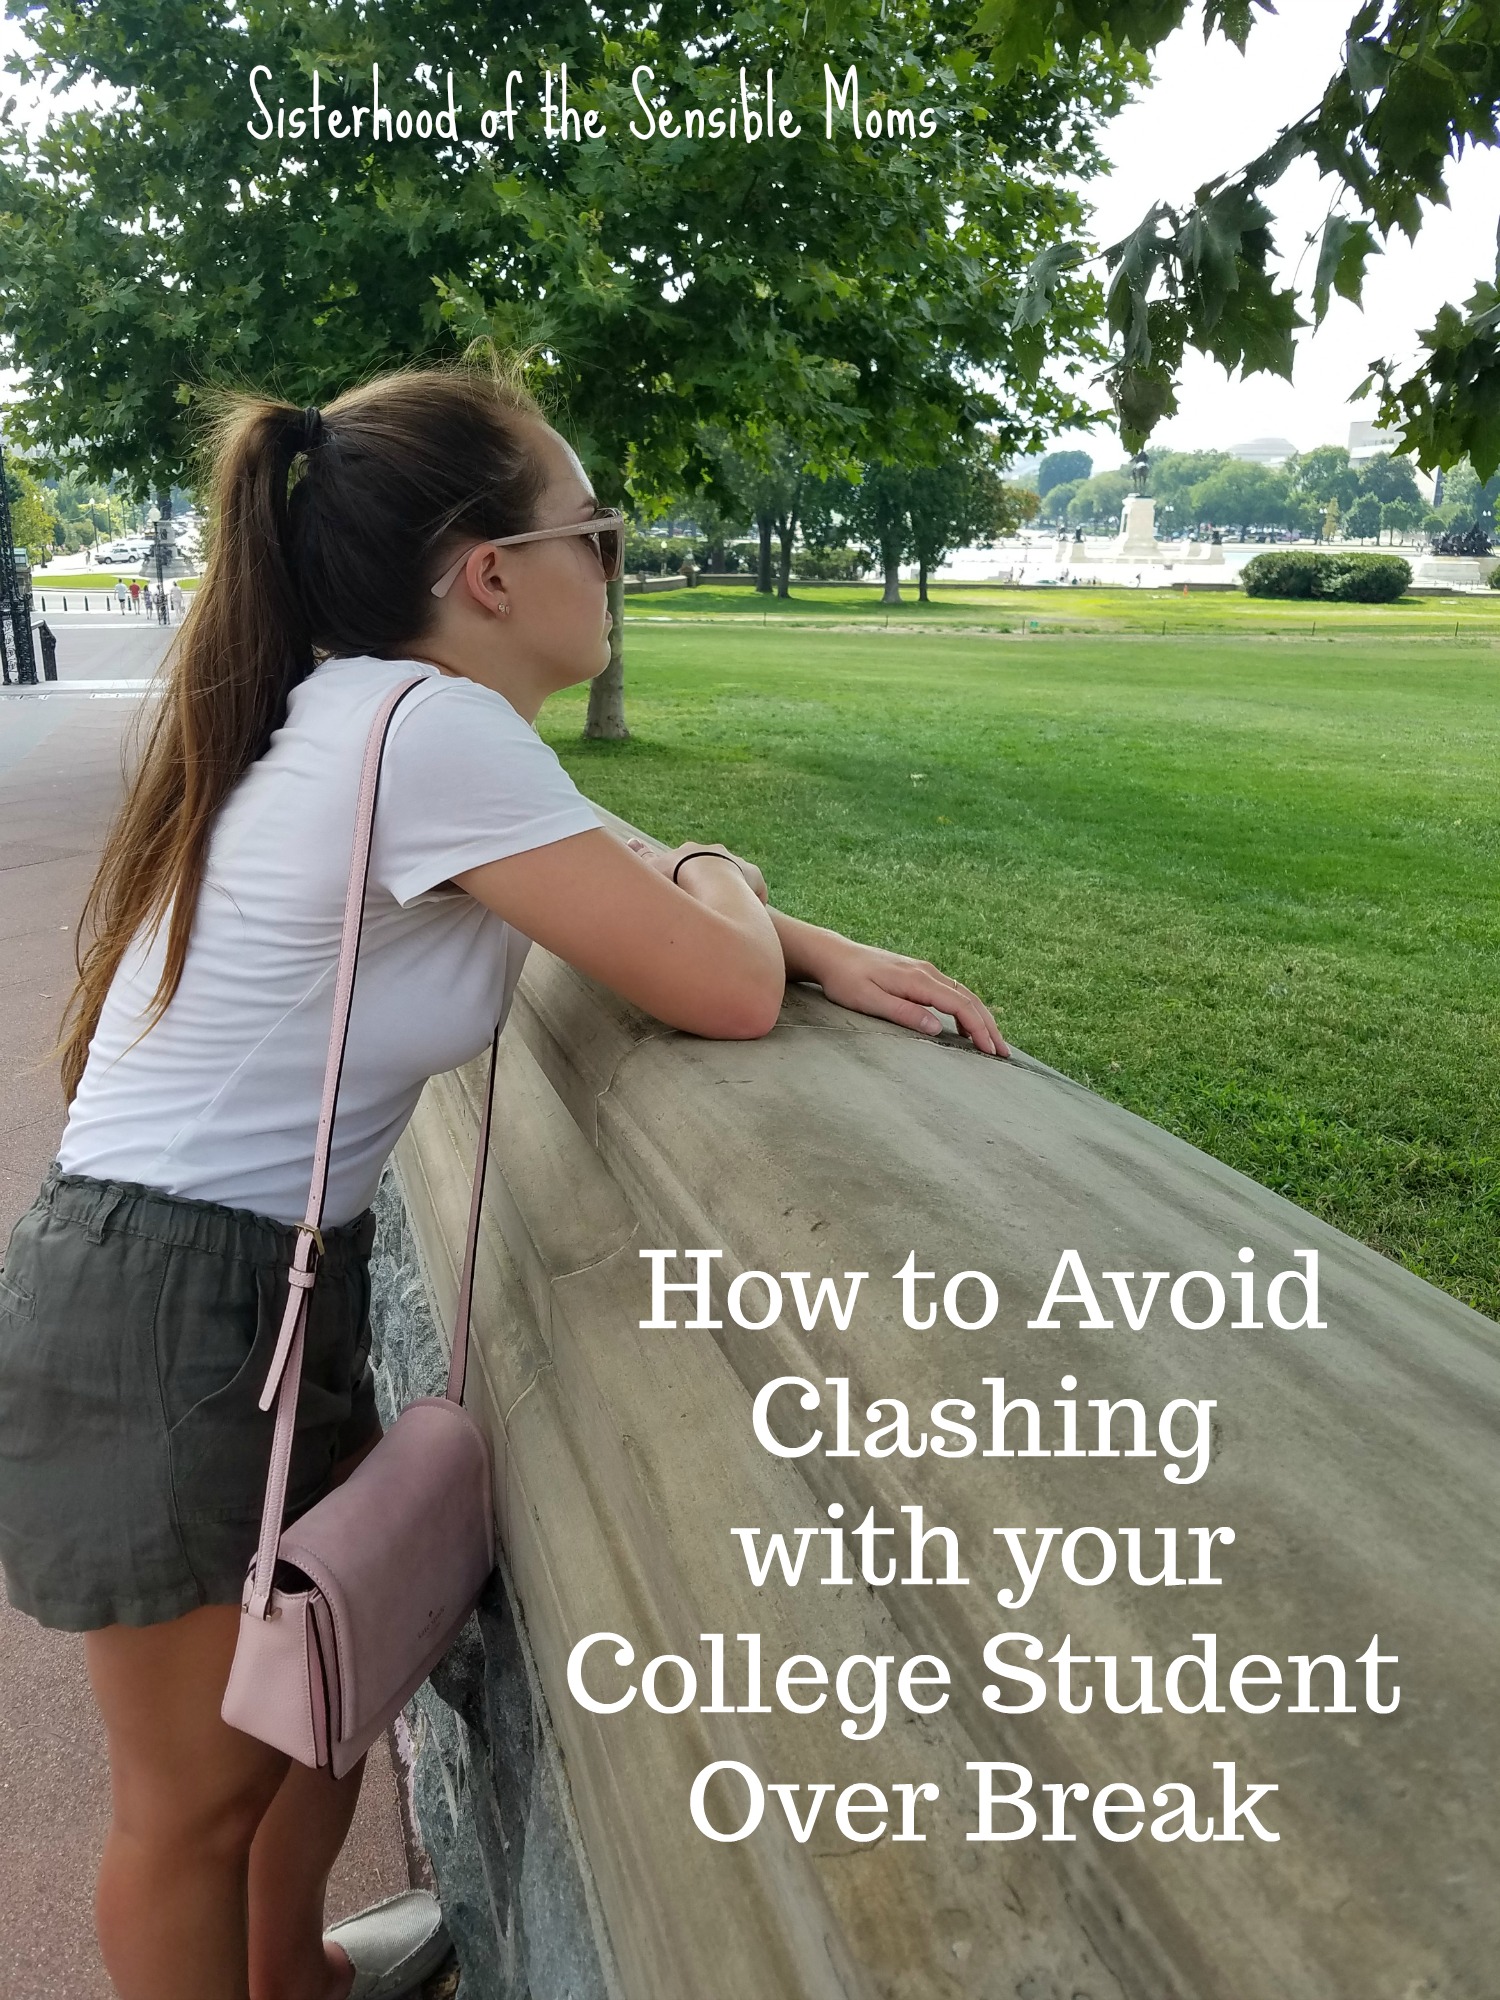 How To Avoid Clashing With Your College Student Over Break | Sisterhood of the Sensible Moms | #parentingadvice #college